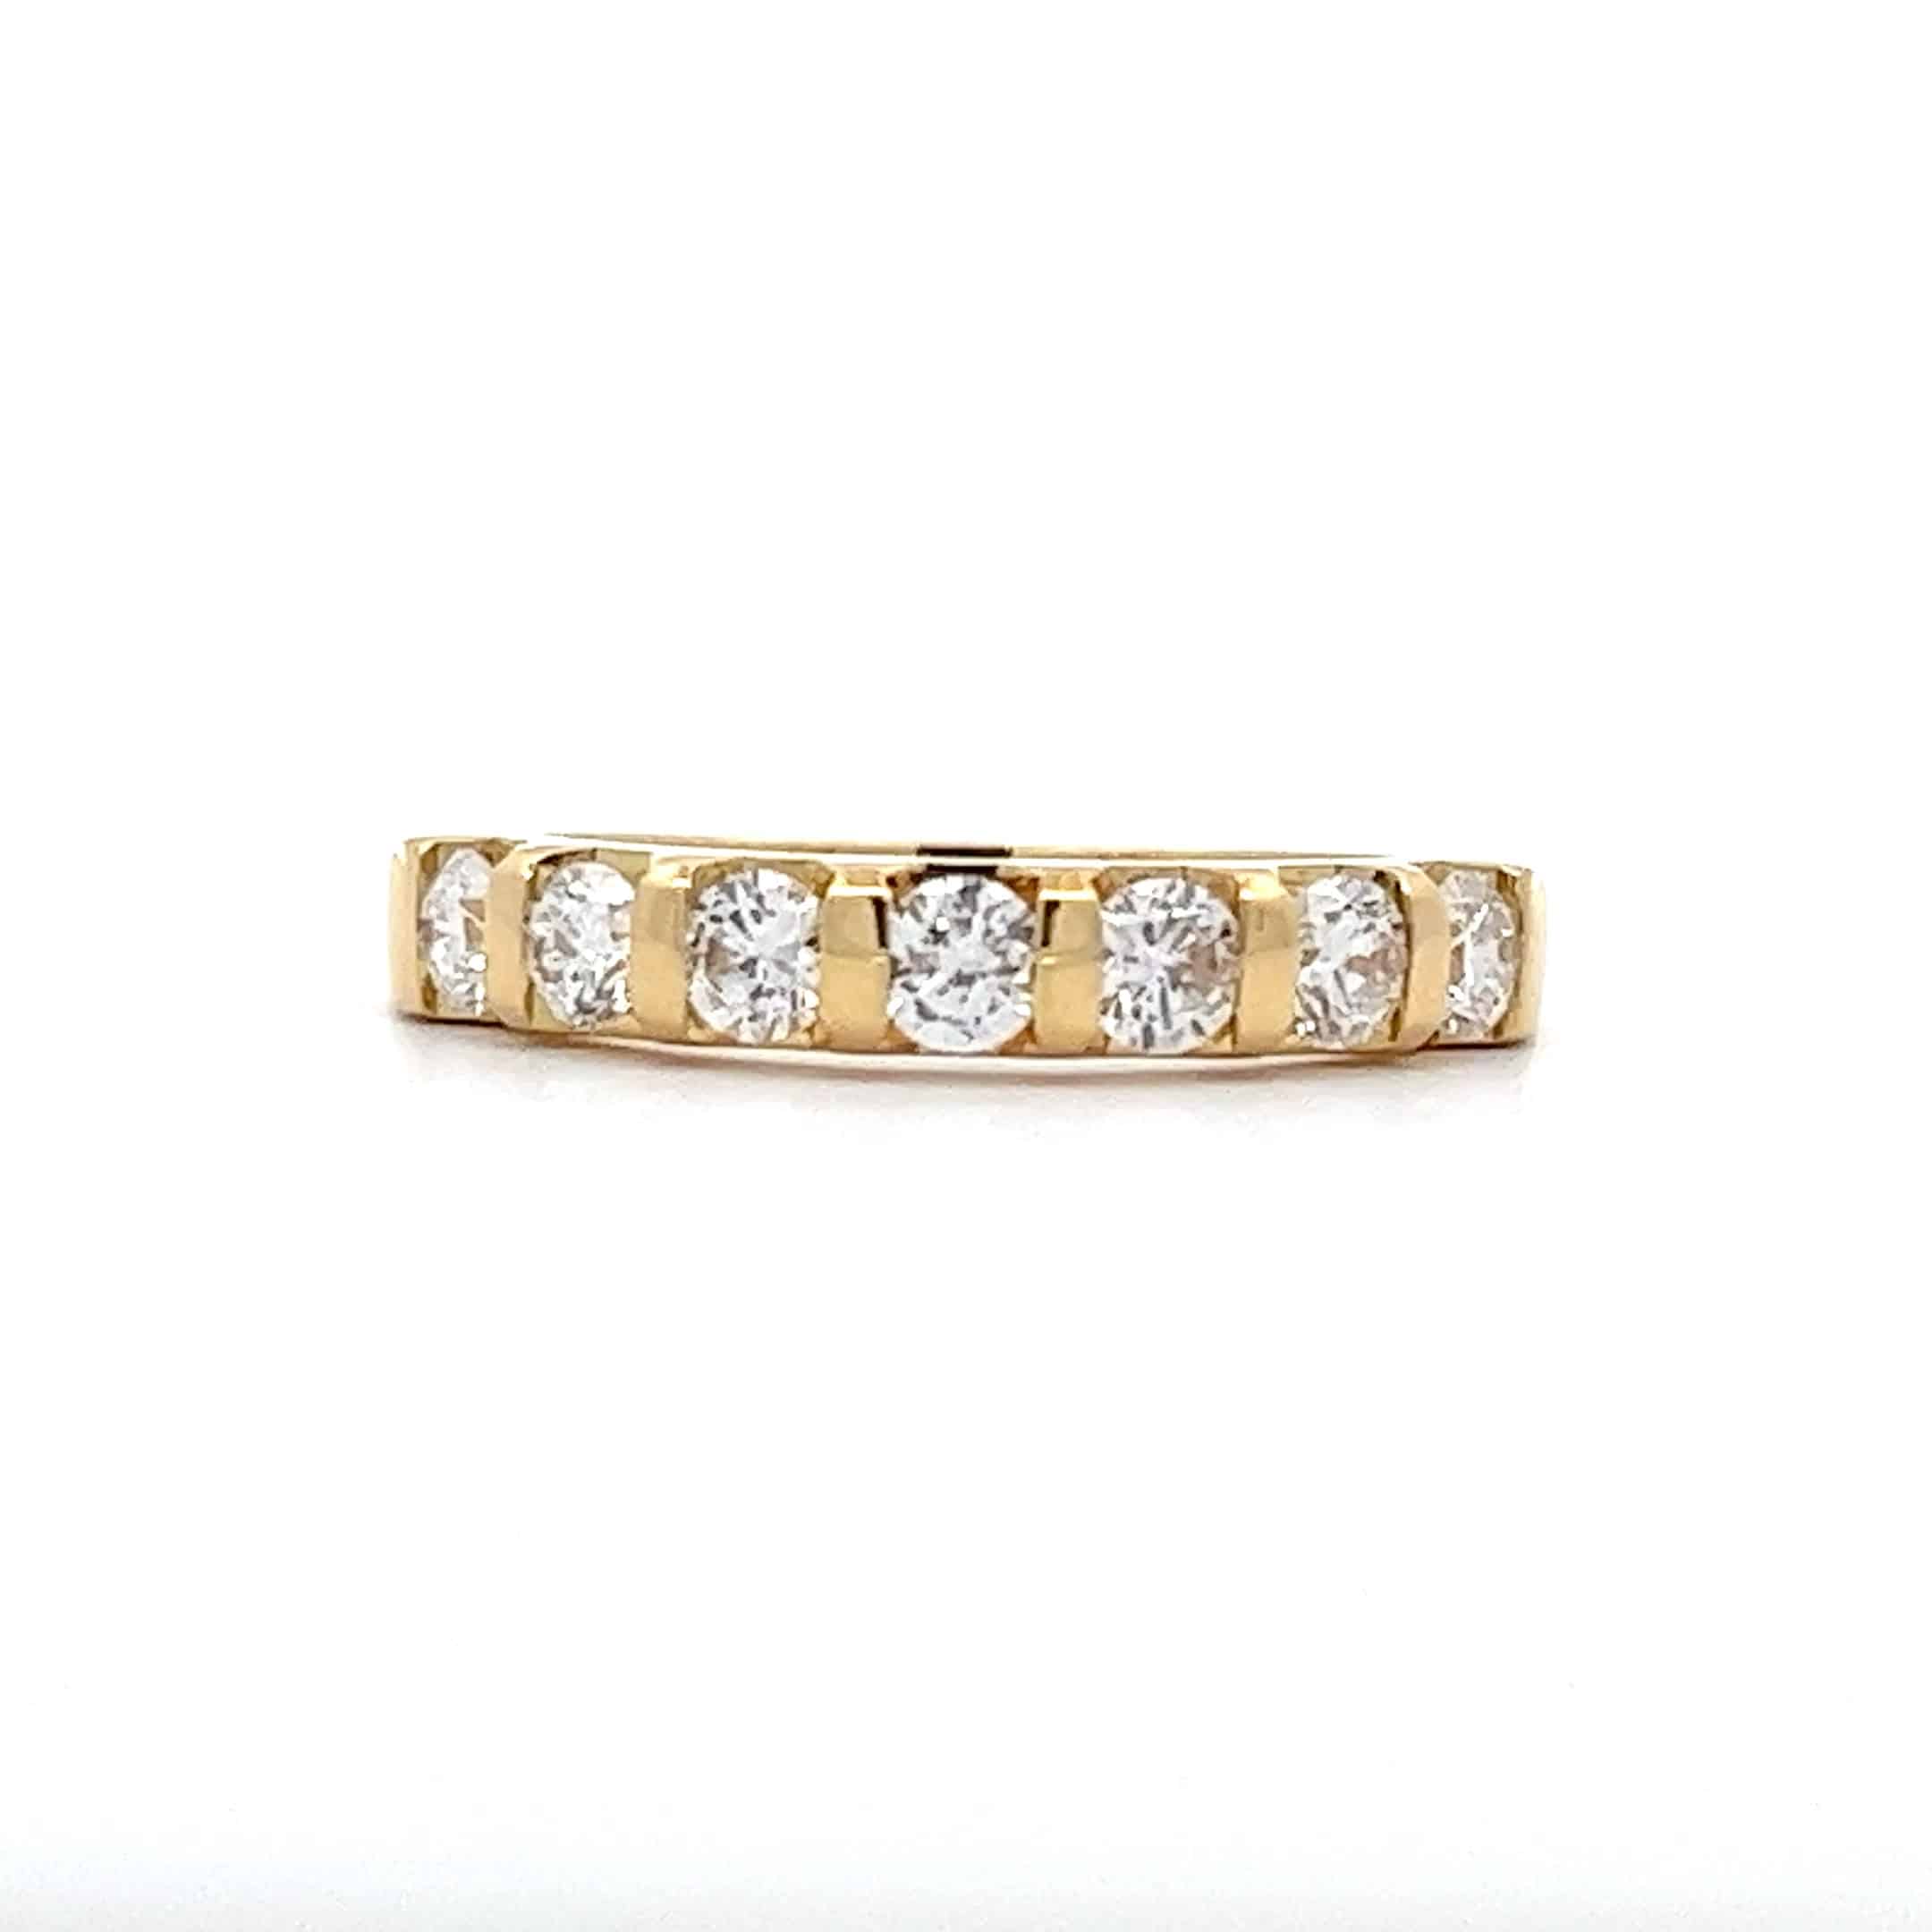 0.77ct Brilliant Cut Diamond Ring Set in 18ct Yellow Gold – Pre-Owned